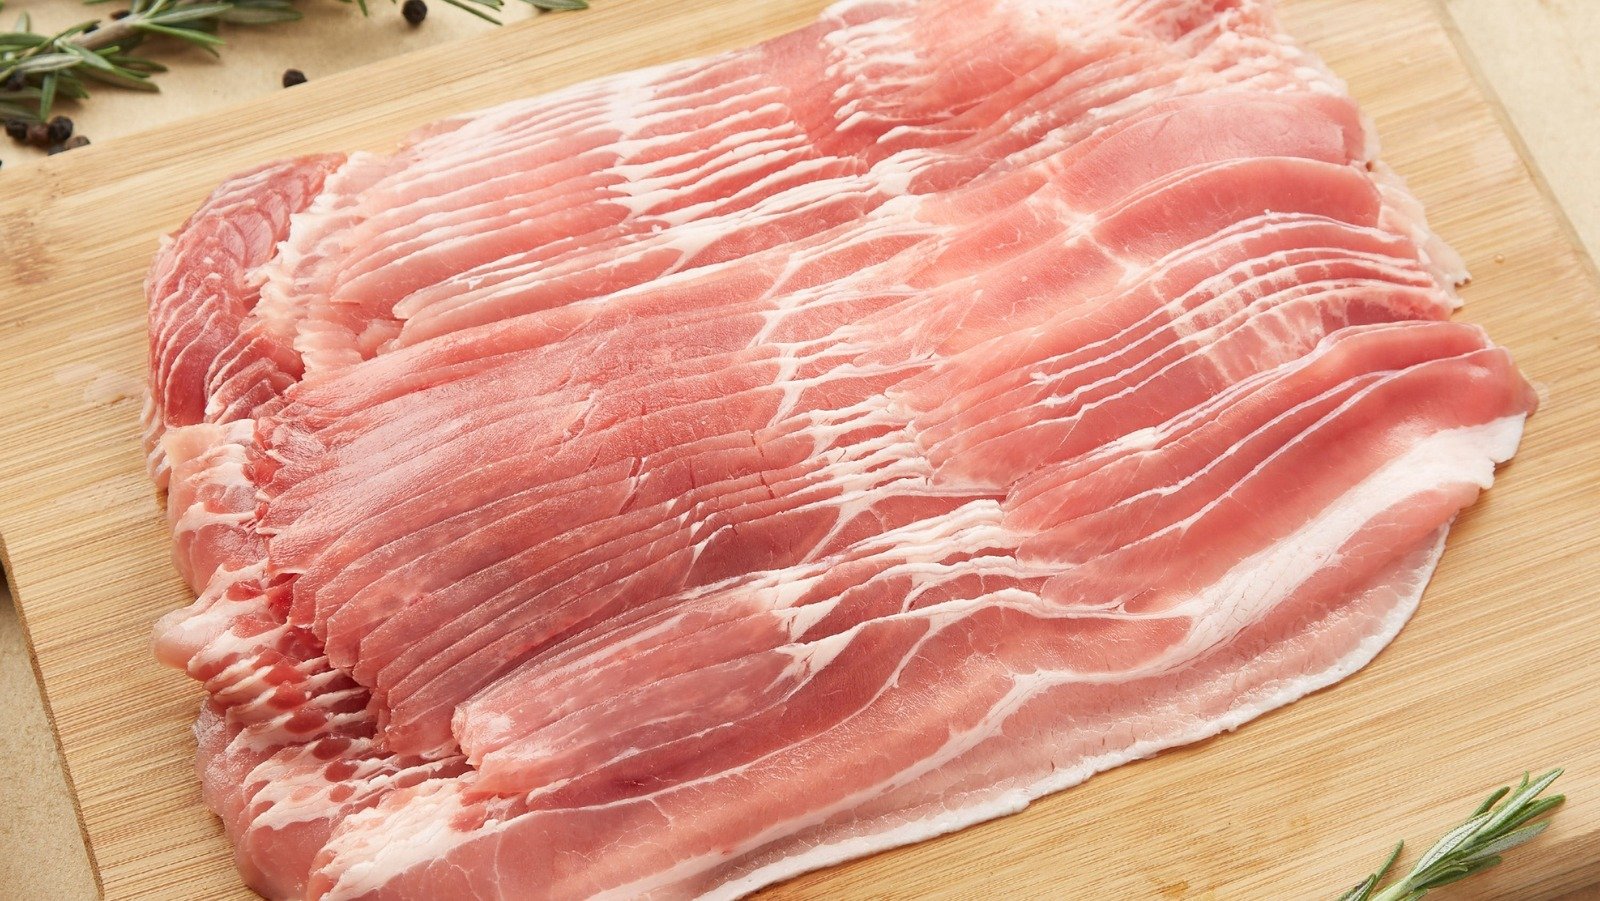 Why Bacon Packaging Isn't Usually Resealable